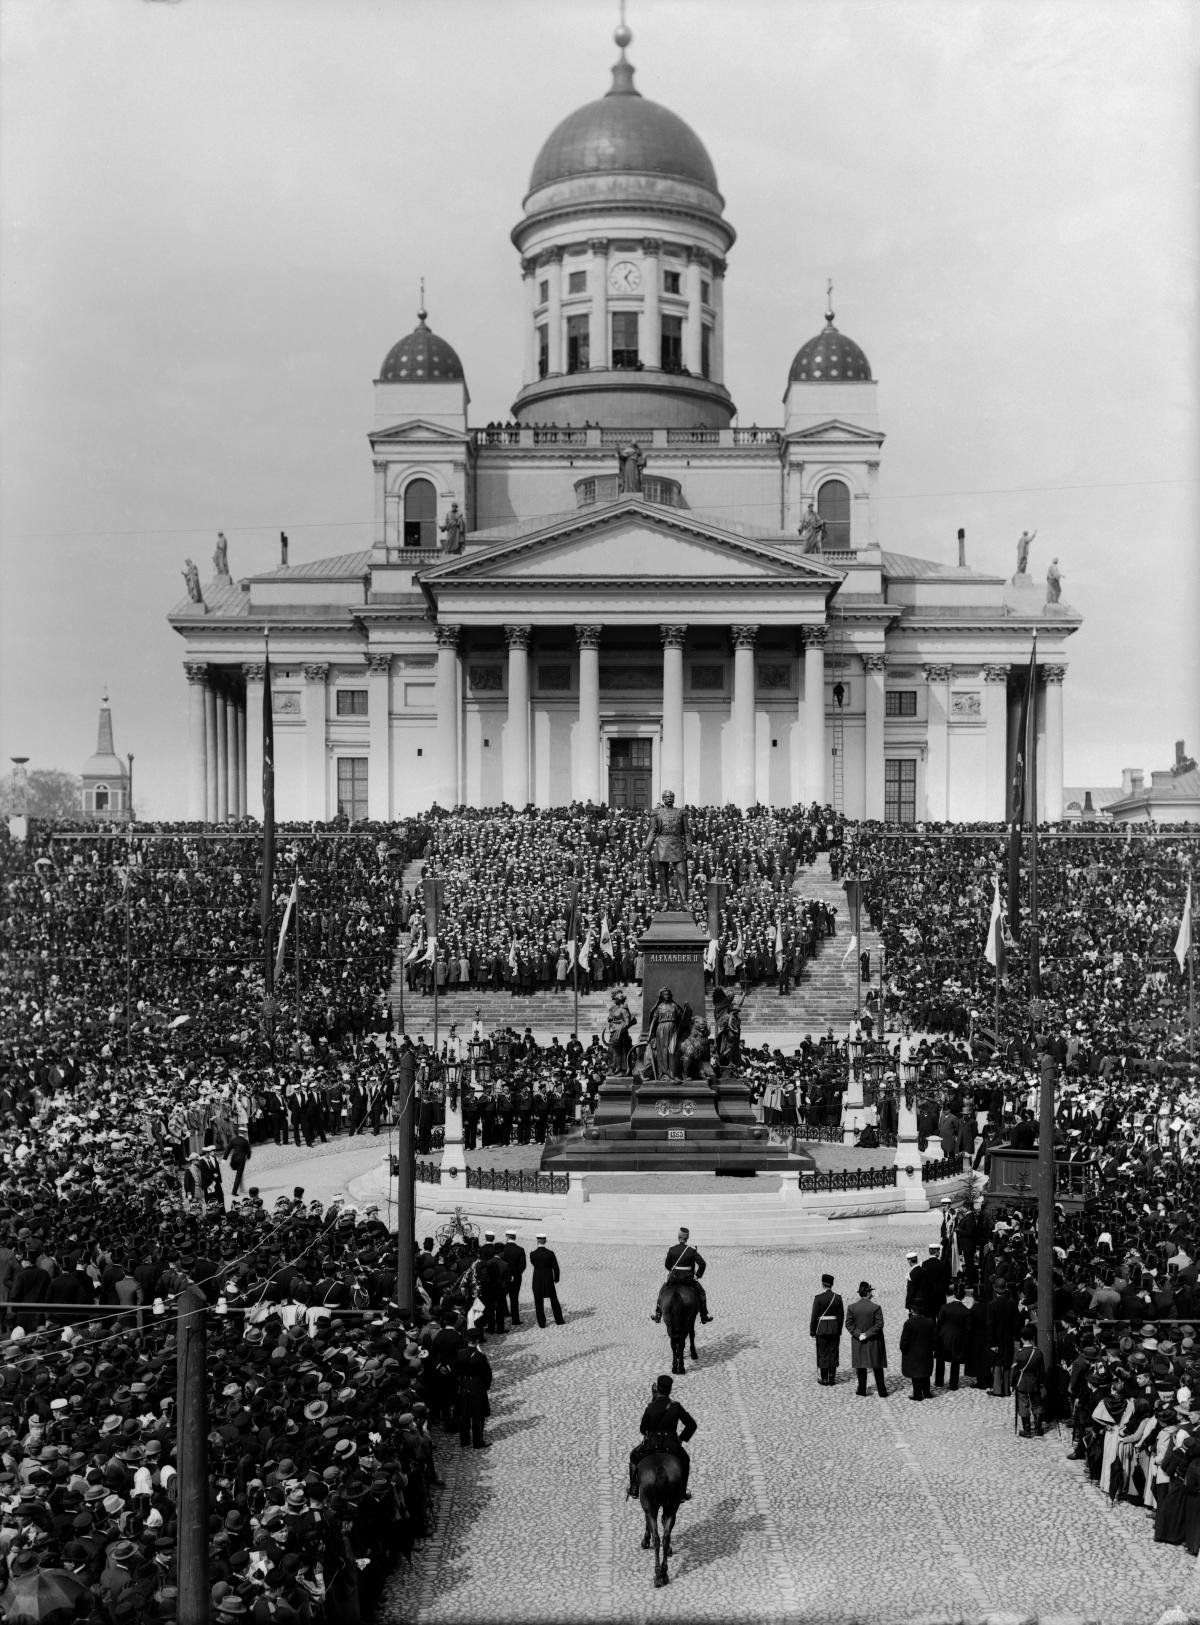 The unveiling ceremony of the statue of Emperor Alexander II on the Senate Square on 29 April 1894. During the years of repression, anti-Russian demonstrations gathered at the statue of the emperor, who was considered a “Liberator”.  Photo: Helsinki City Museum / Daniel Nyblin